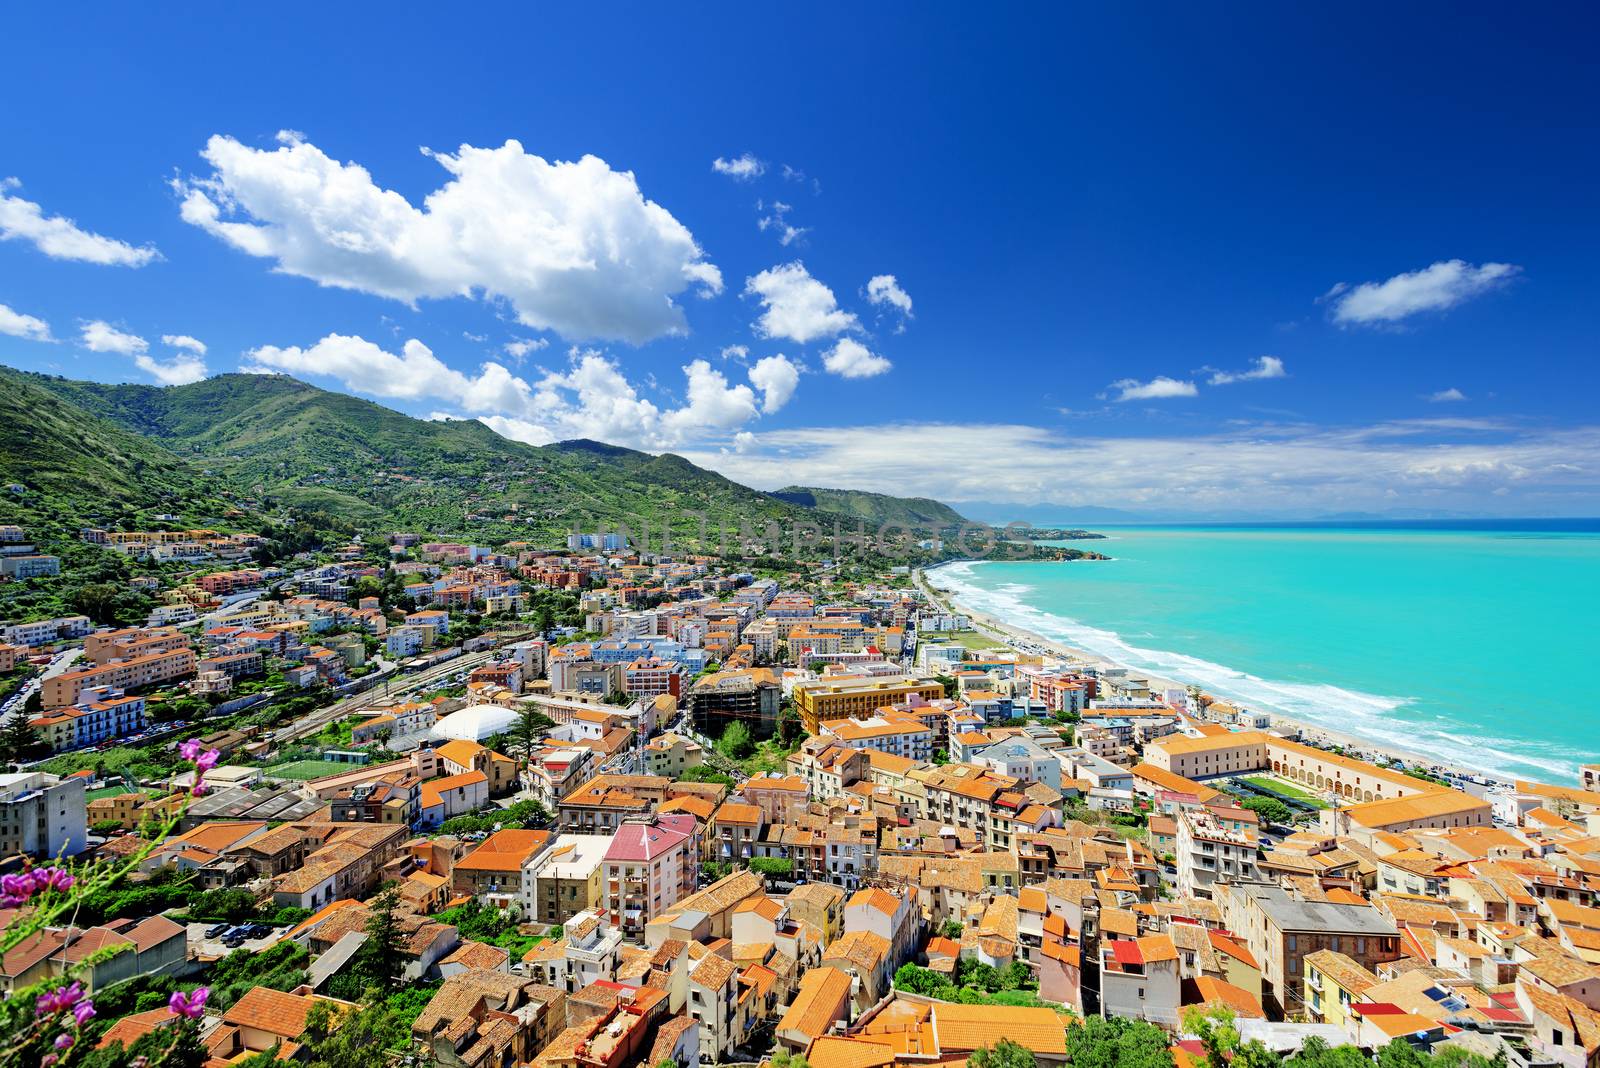 Aerial view of town Cefalu from above, Sicily, Italy